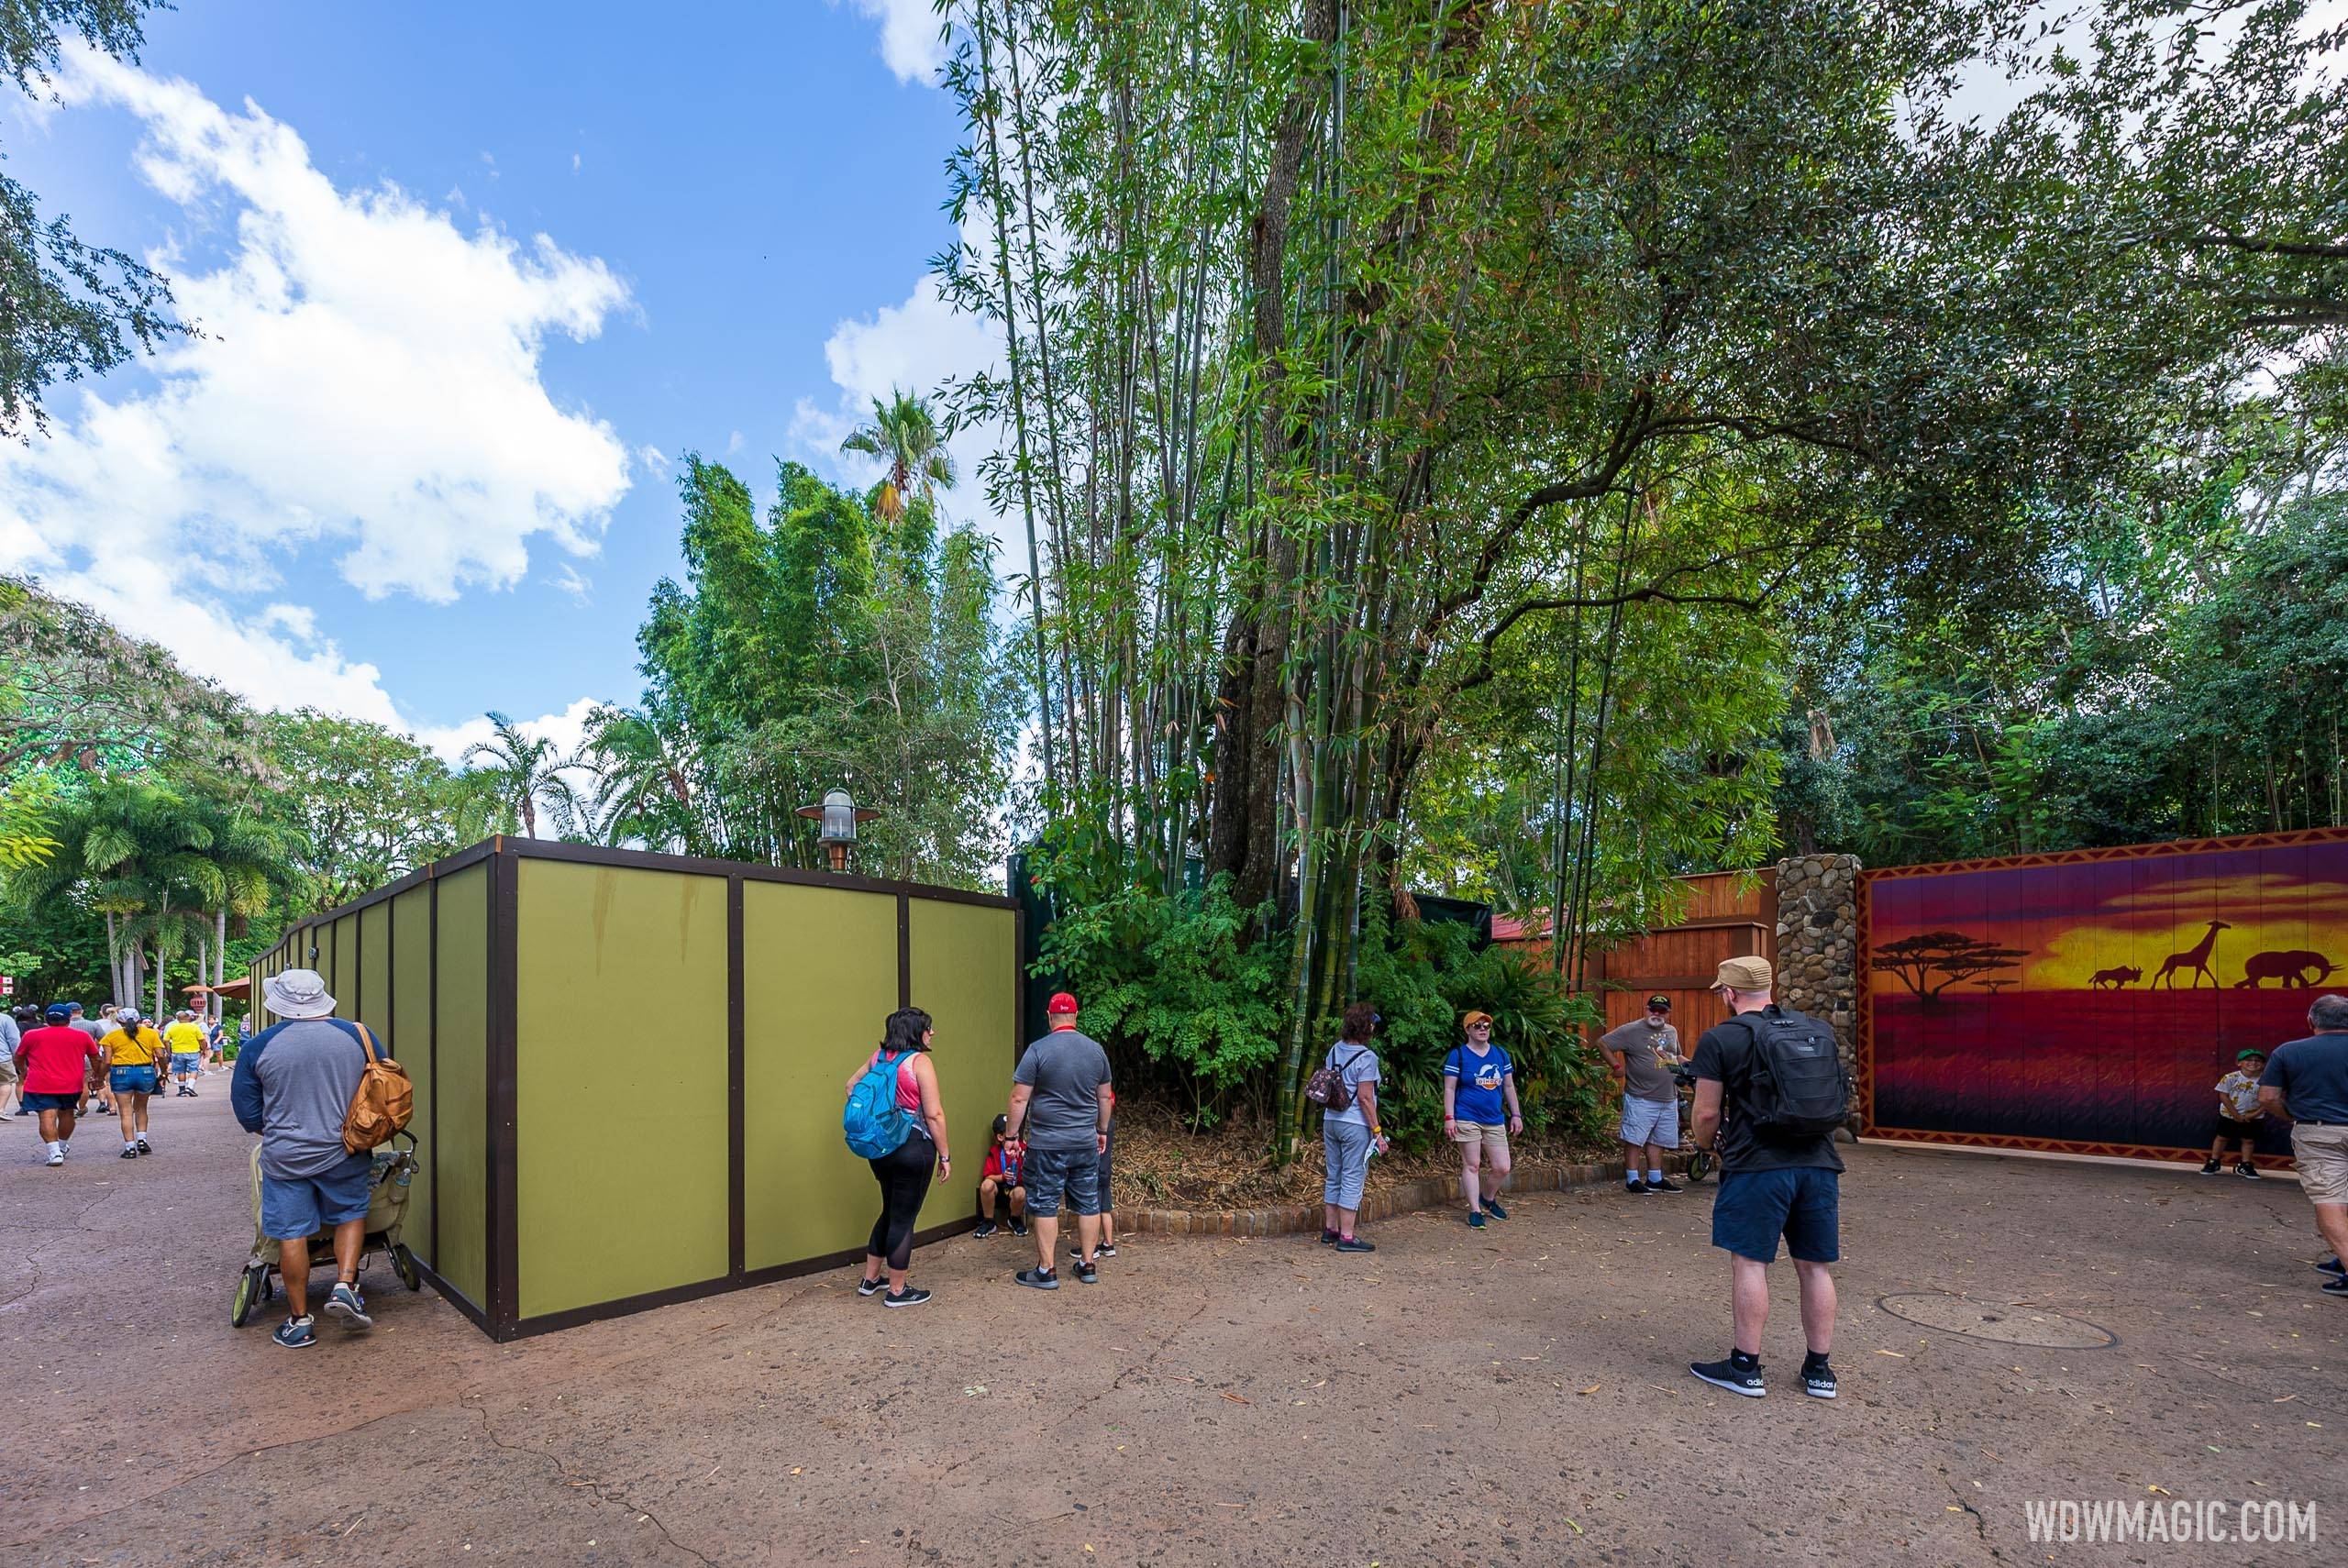 Construction walls up on Discovery Island at Disney's Animal Kingdom